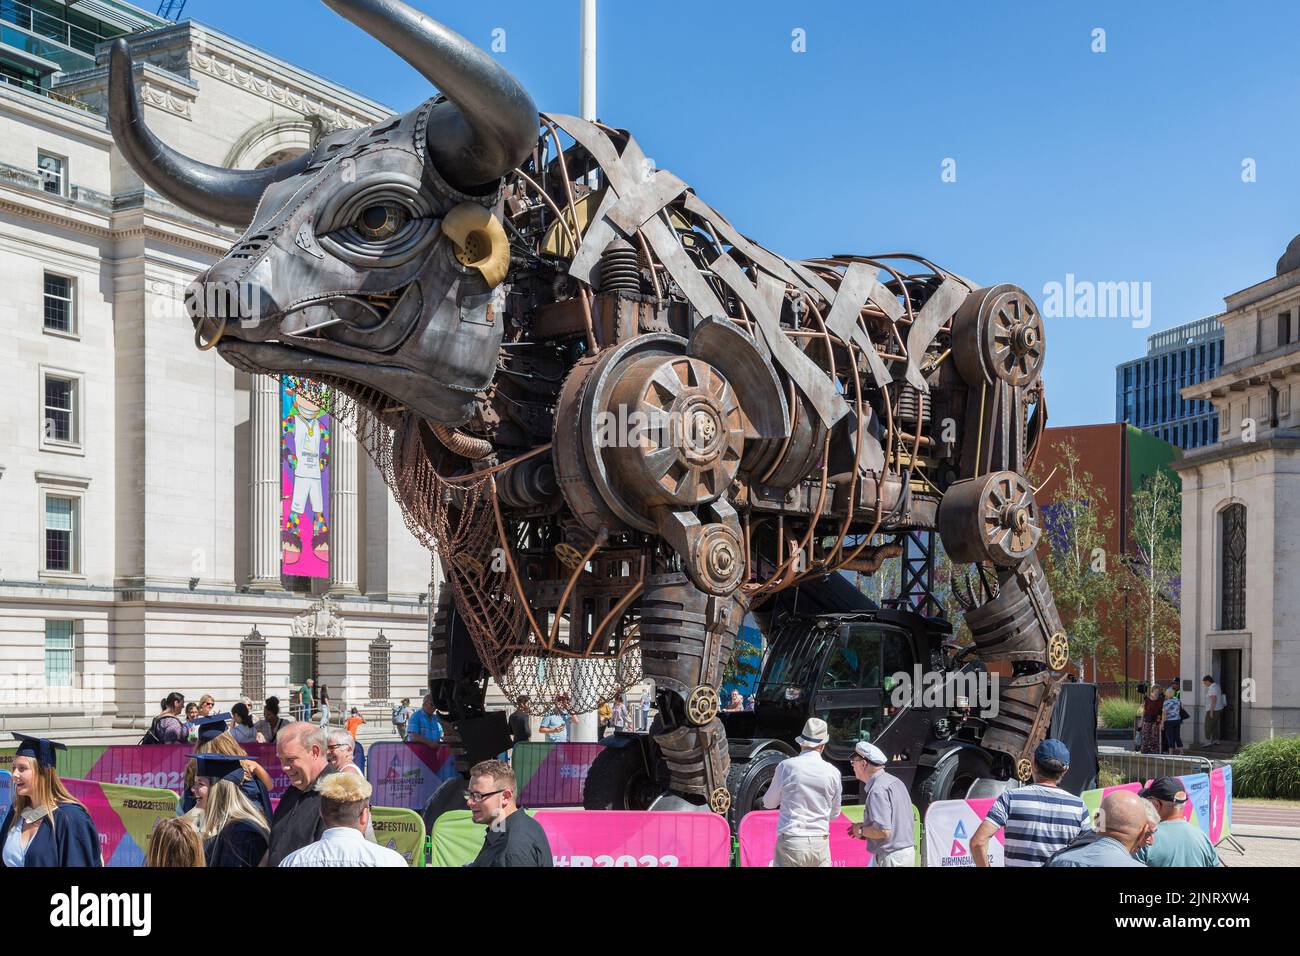 The 10 metre high raging bull from the 2022 Commonwealth Games opening ceremony surrounded by locals and tourists in Centenary Square, Birmingham, Stock Photo